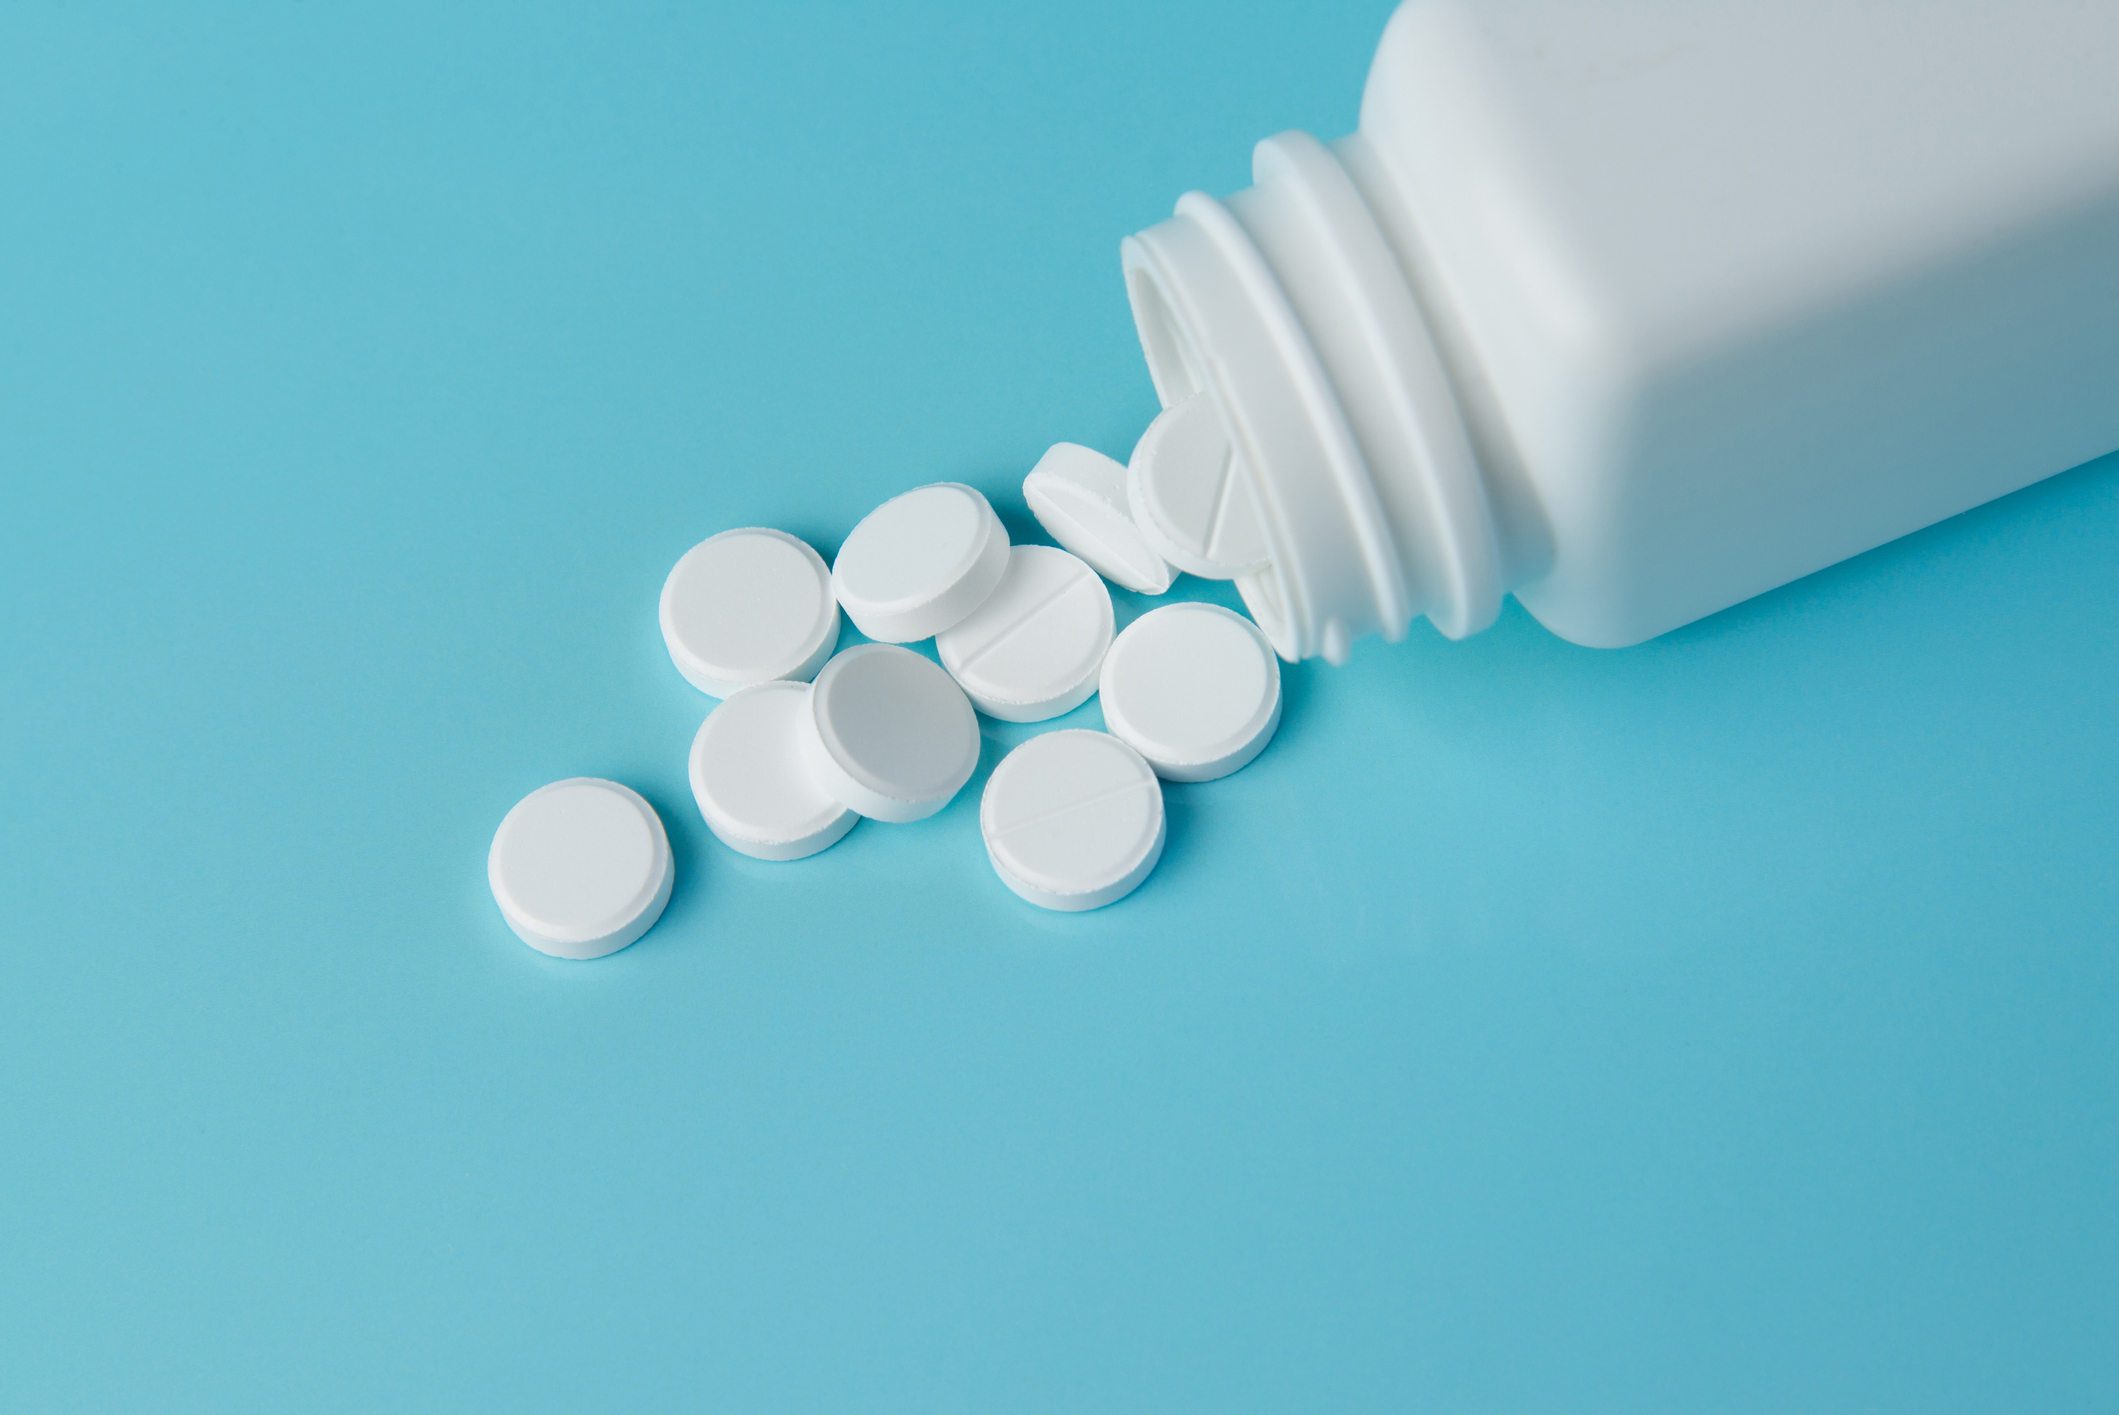 When it comes to aspirin and heart protection, does dose matter?